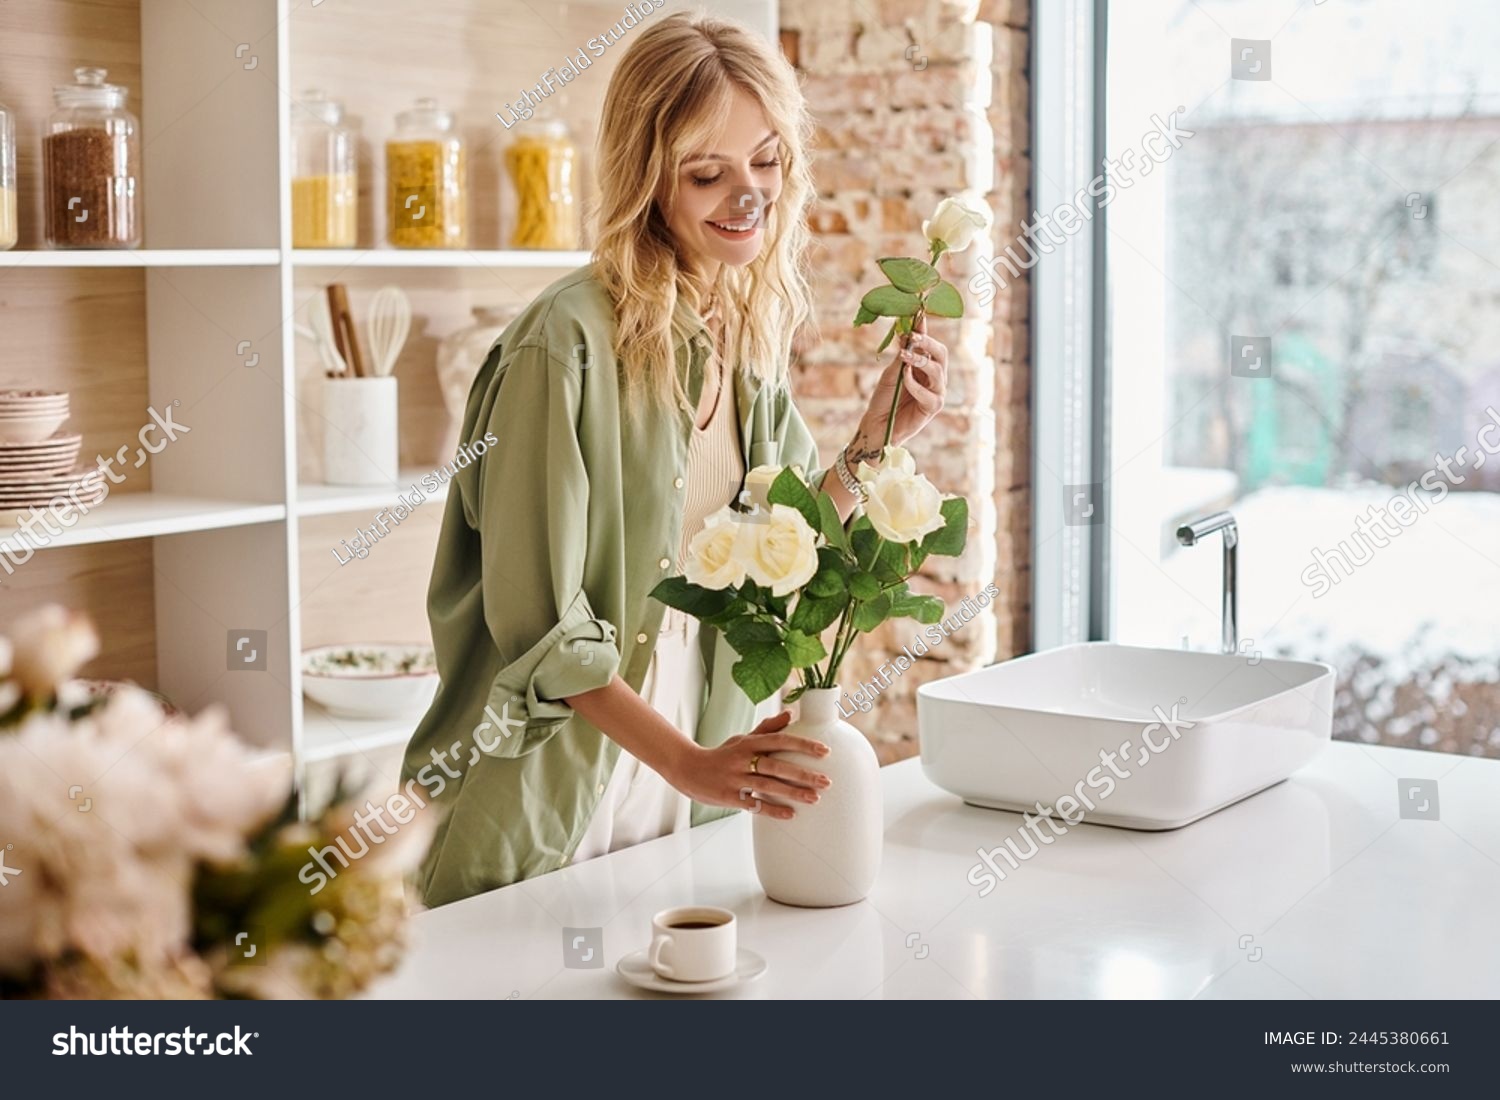 Woman in kitchen arranging colorful flowers in a vase at home. #2445380661